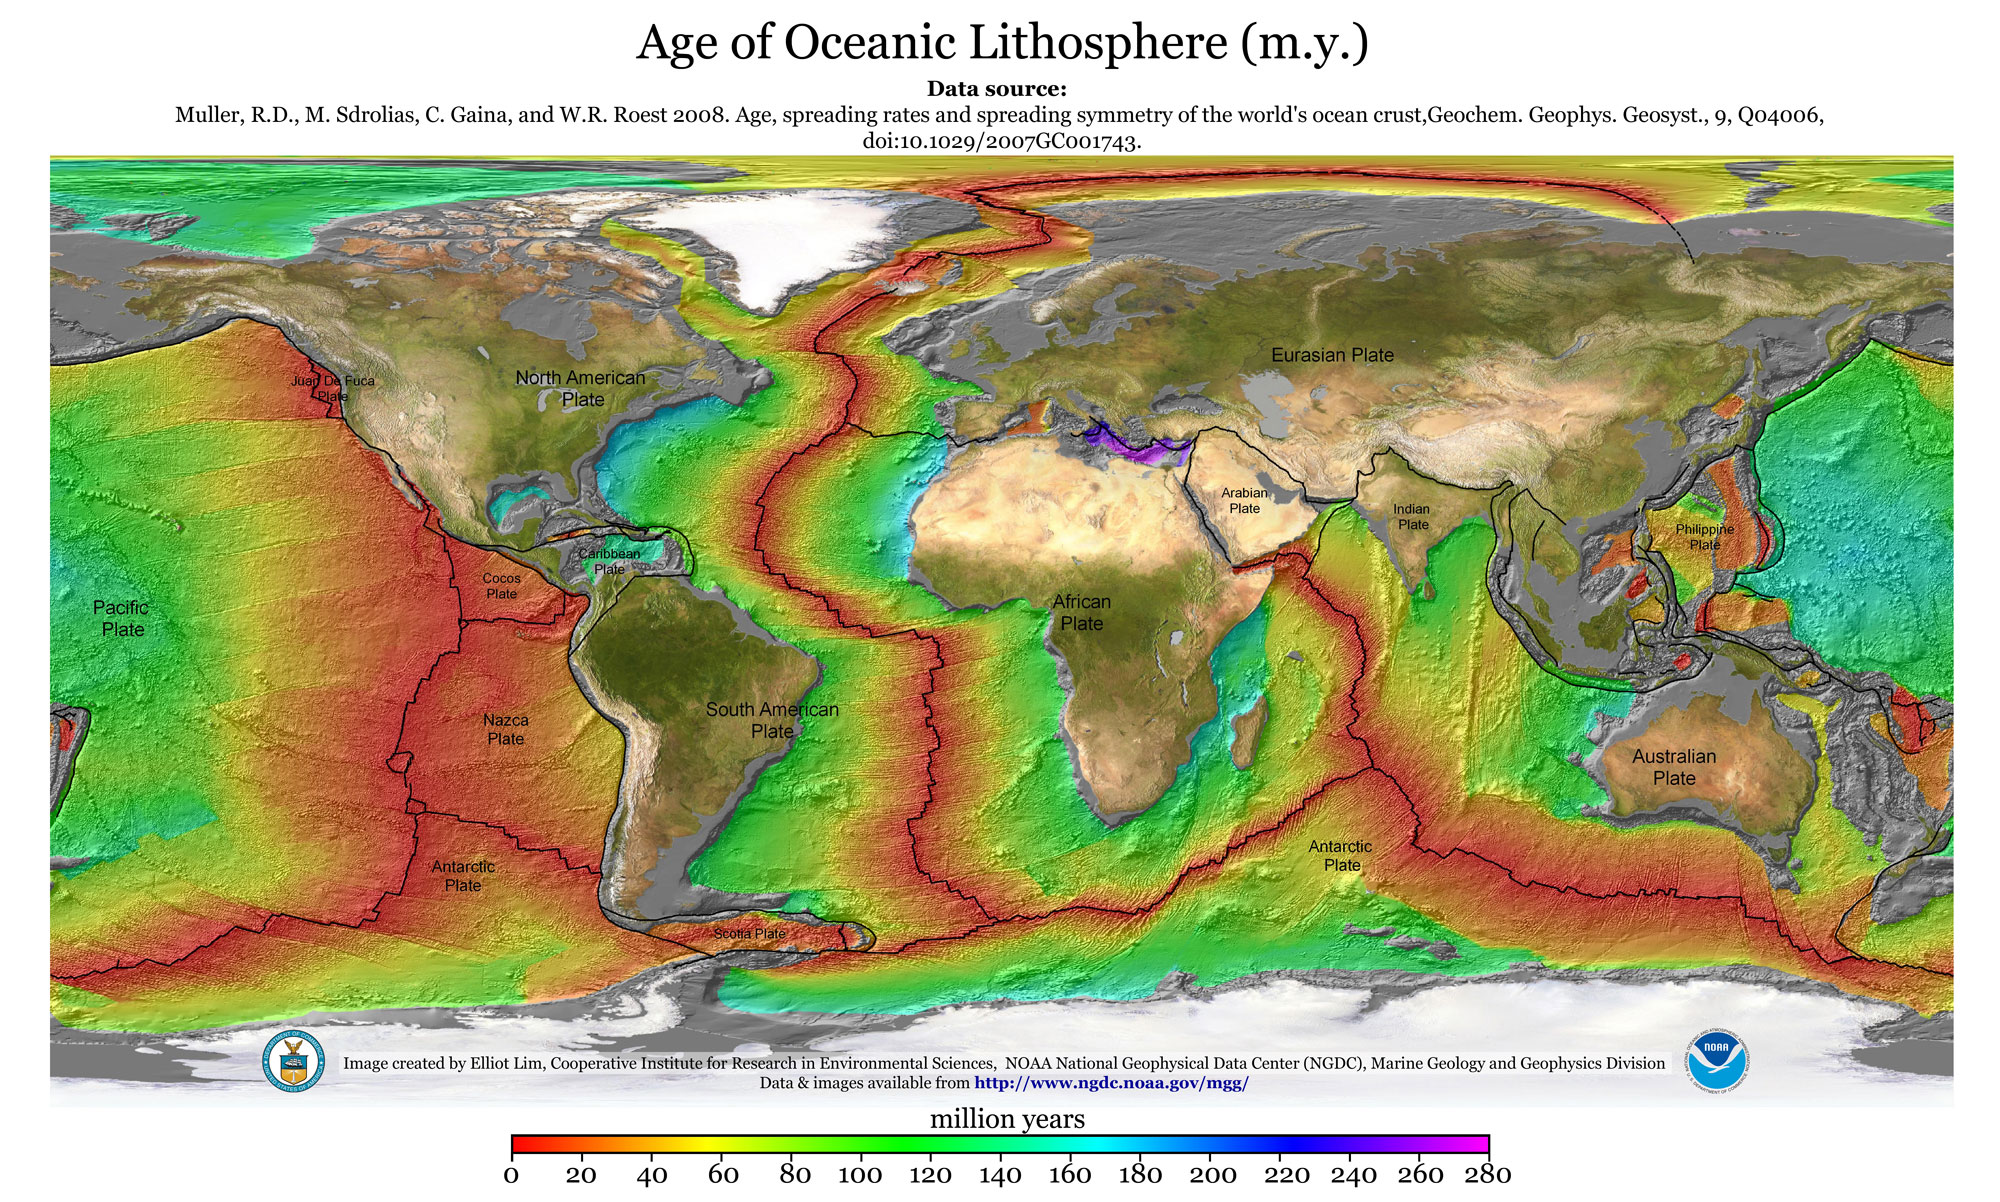 Map of the world centered on the Atlantic Ocean showing the plate boundaries. The ocean floors are color-coded to indicate the ages of the rocks making them up. The youngest rocks are near spreading centers.